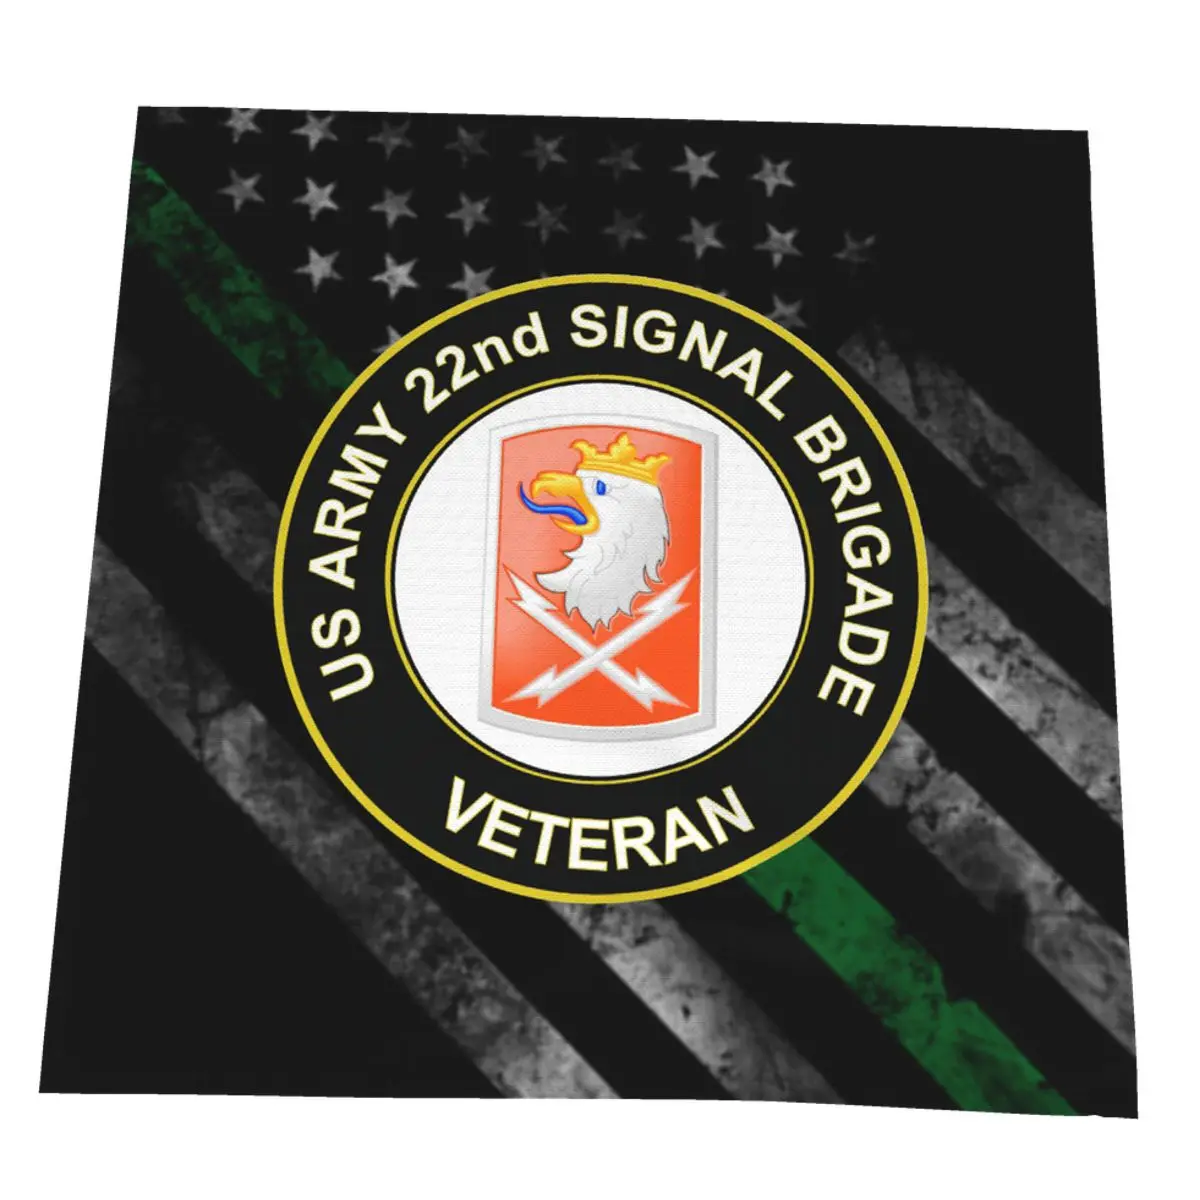 

US Army 22nd Signal Brigade Veteran Napkin For Party Wedding Table Cloth Linen Cotton Available Restaurant Dinner 50x50cm Hotel